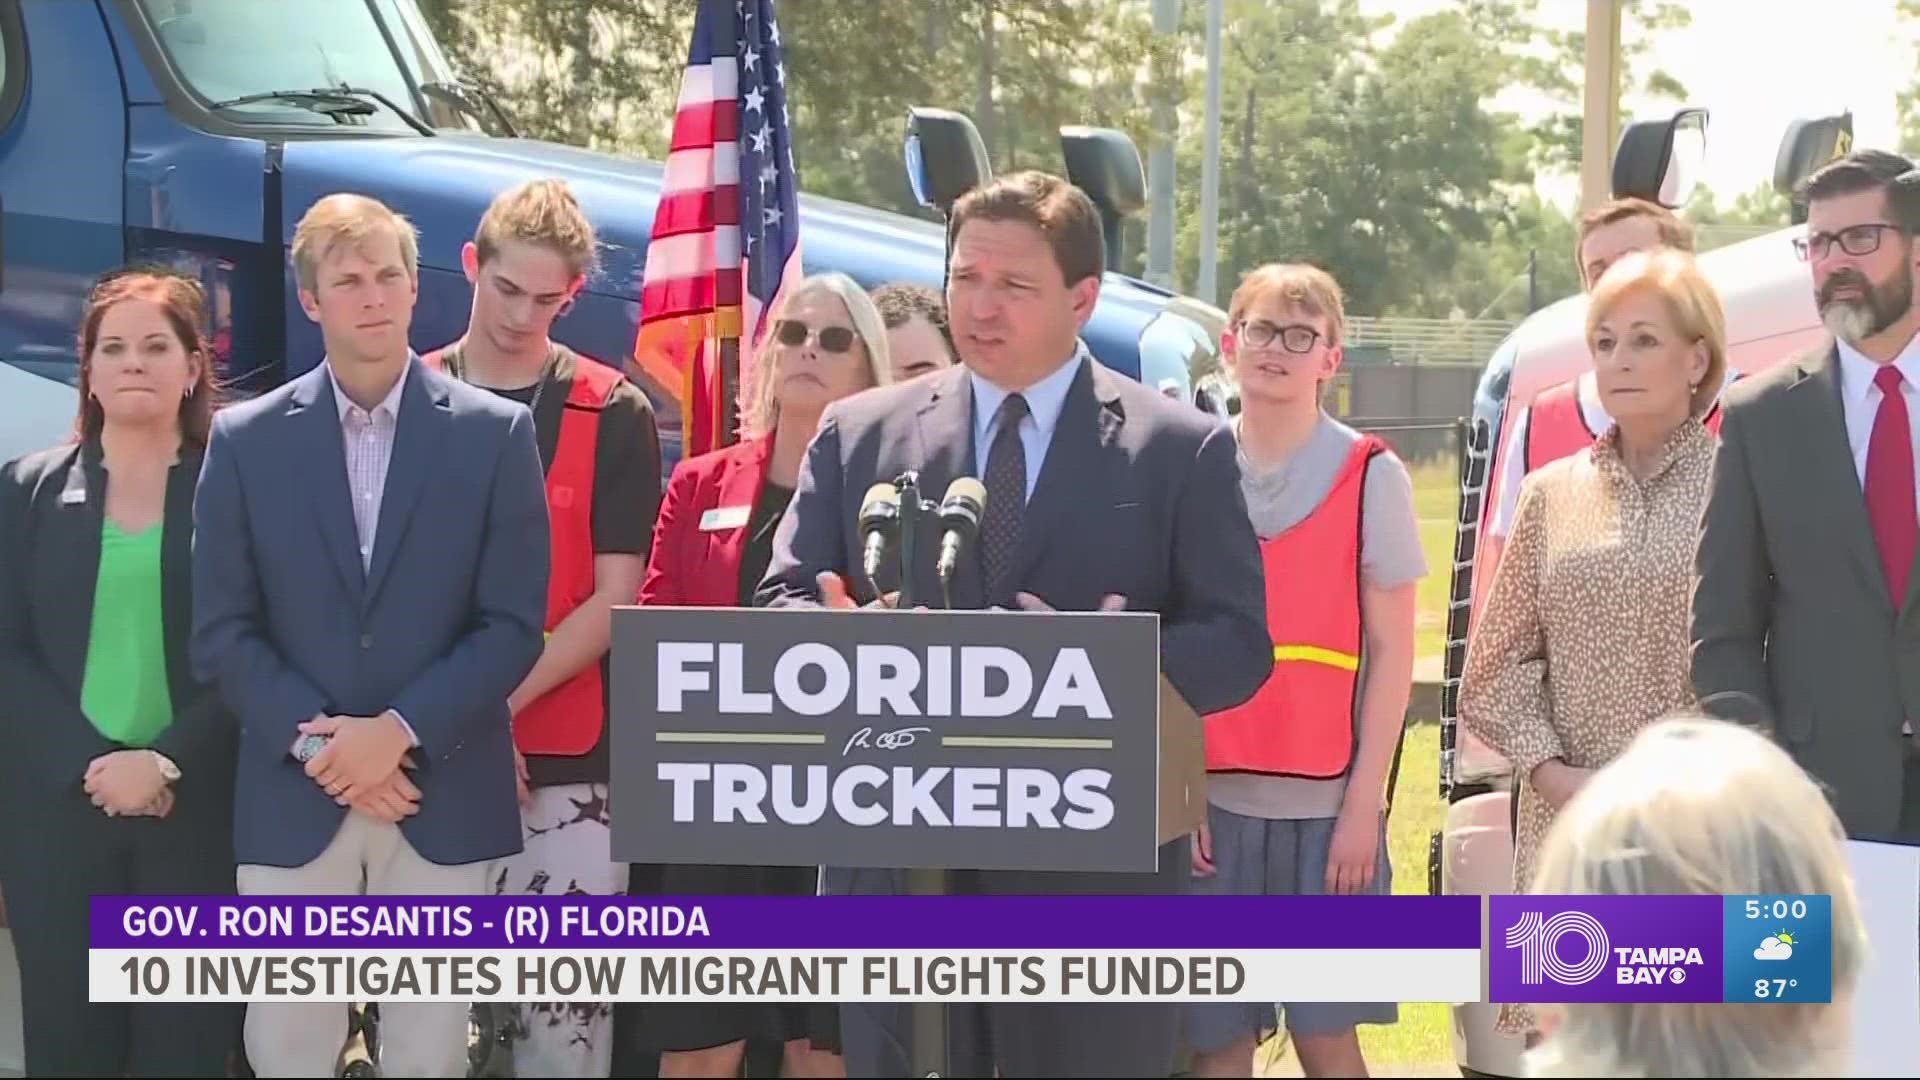 Gov. DeSantis said the state used a portion of the latest budget that includes $12 million to establish a program to transport illegal immigrants.